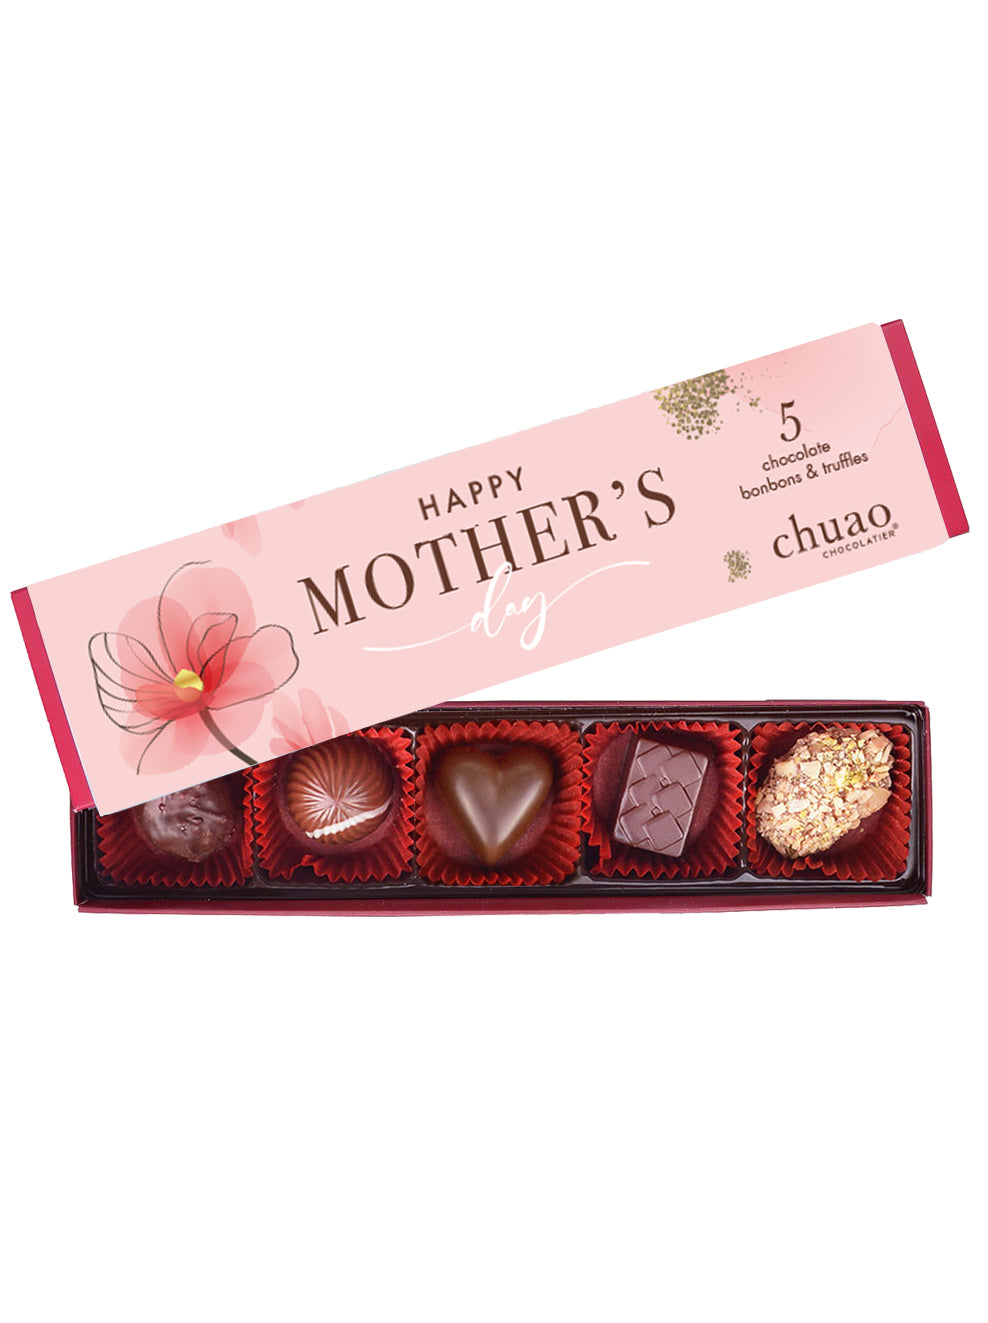 a red rectangle box with 5 chocolate bonbons inside with a mother's day theme